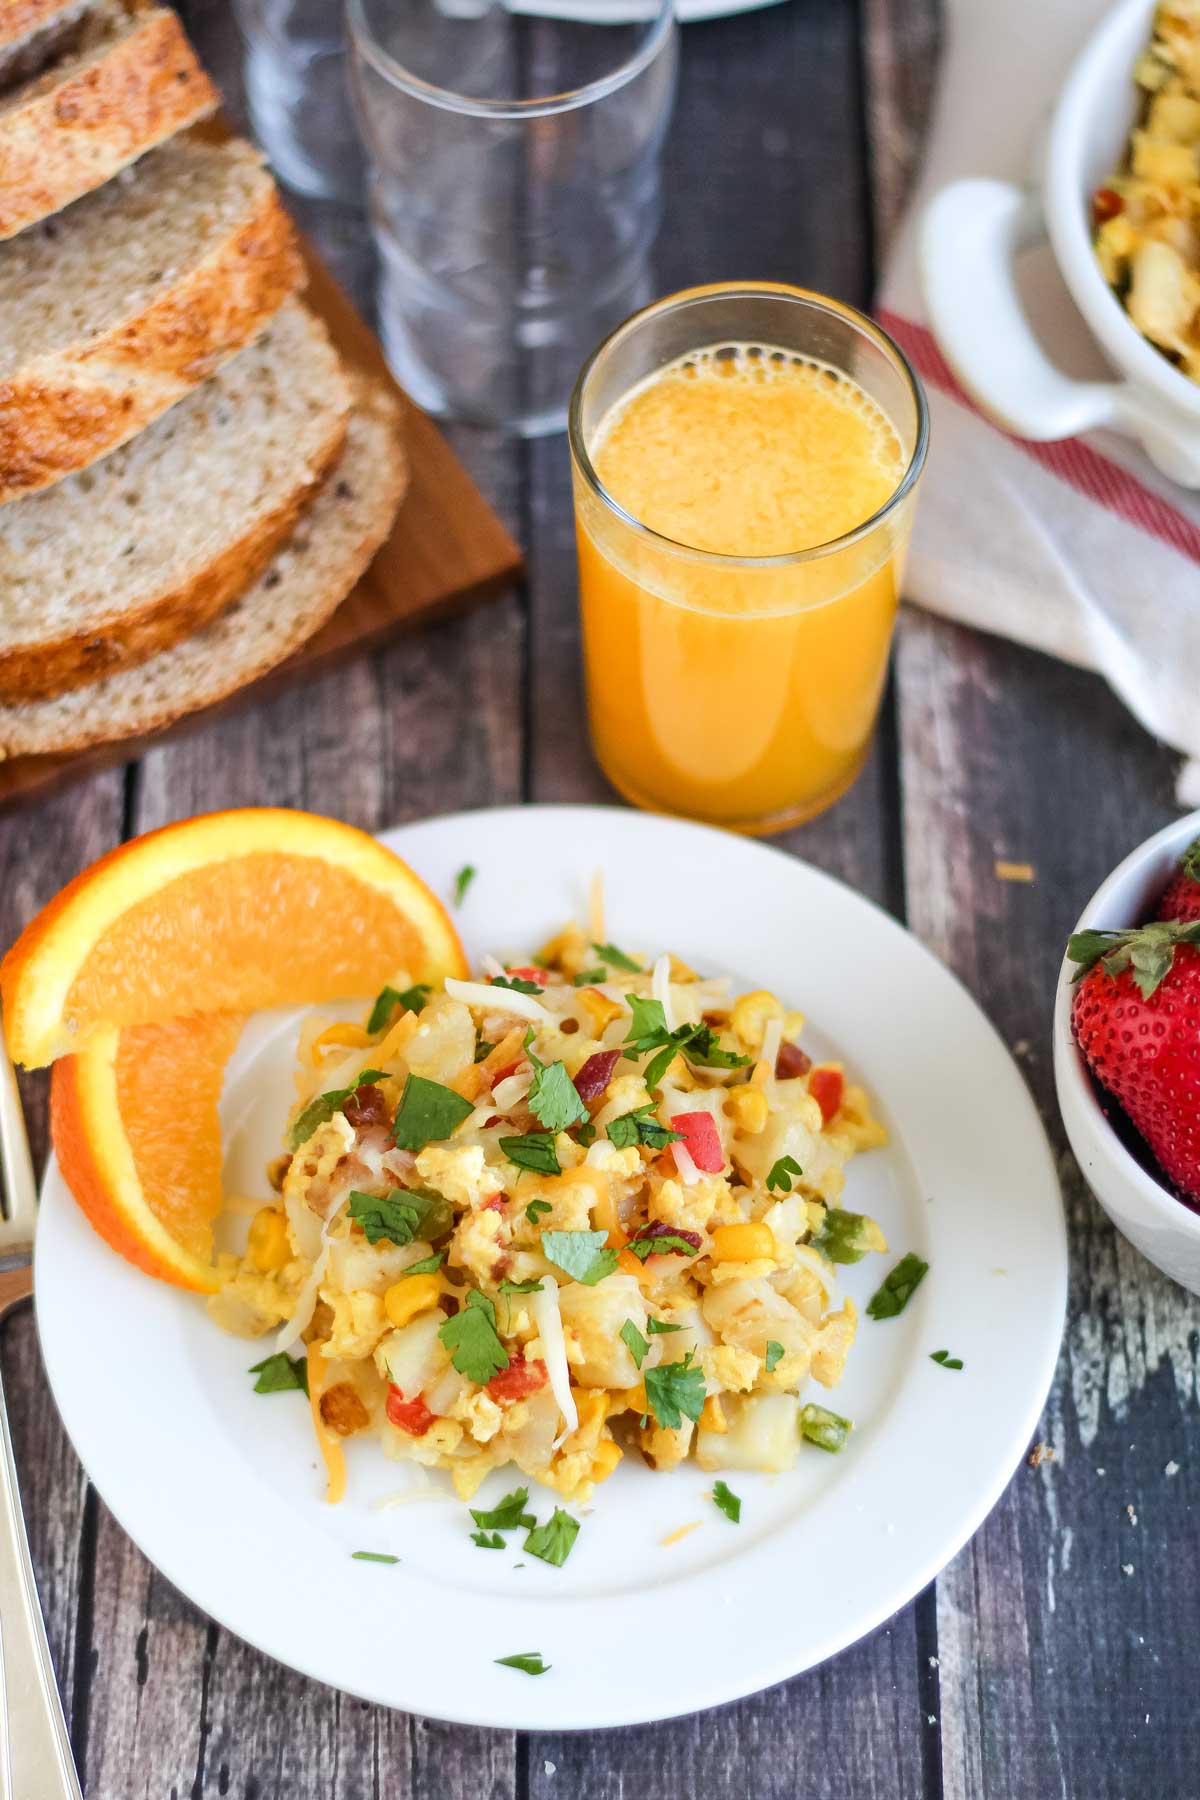 Breakfast scene featuring skillet scramble at center on white plate and in background in shite serving bowl, along with sliced oranges, glass of orange juice, little bowl of fresh strawberries, and wheat bread.